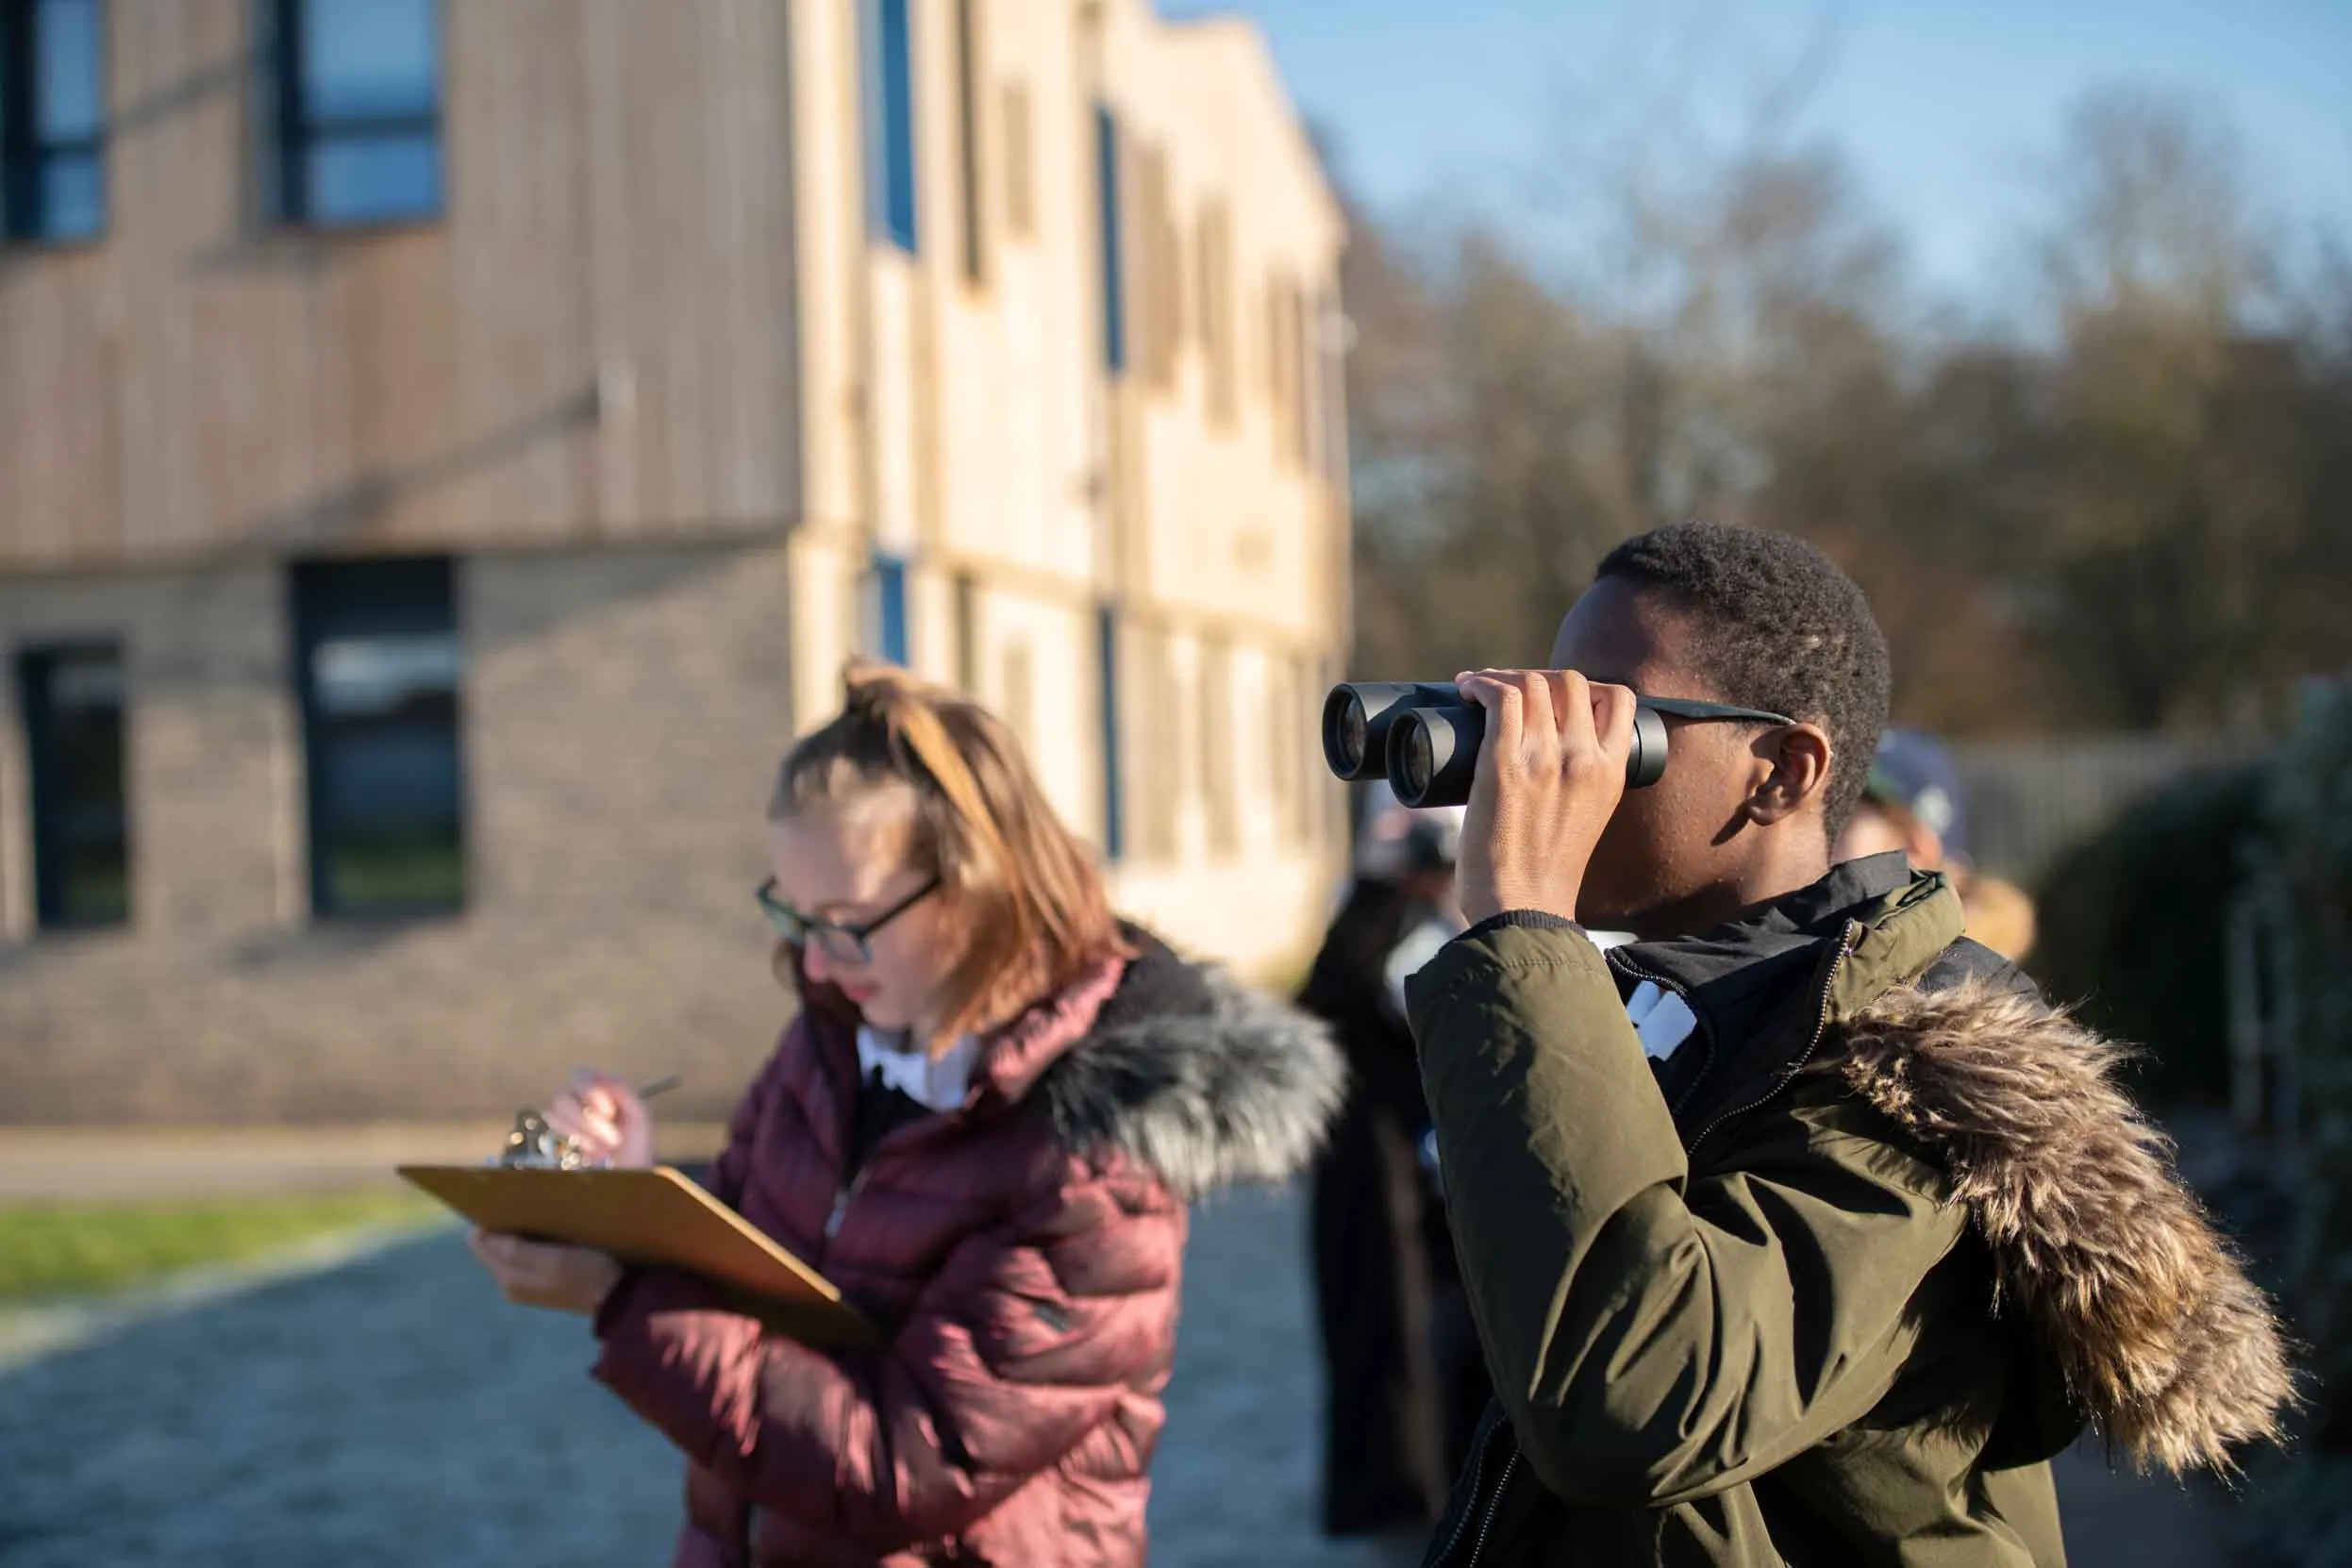 Two children outside of their school building, one in a red coat writing on a clipboard and the other in a green coat looking through binoculars.